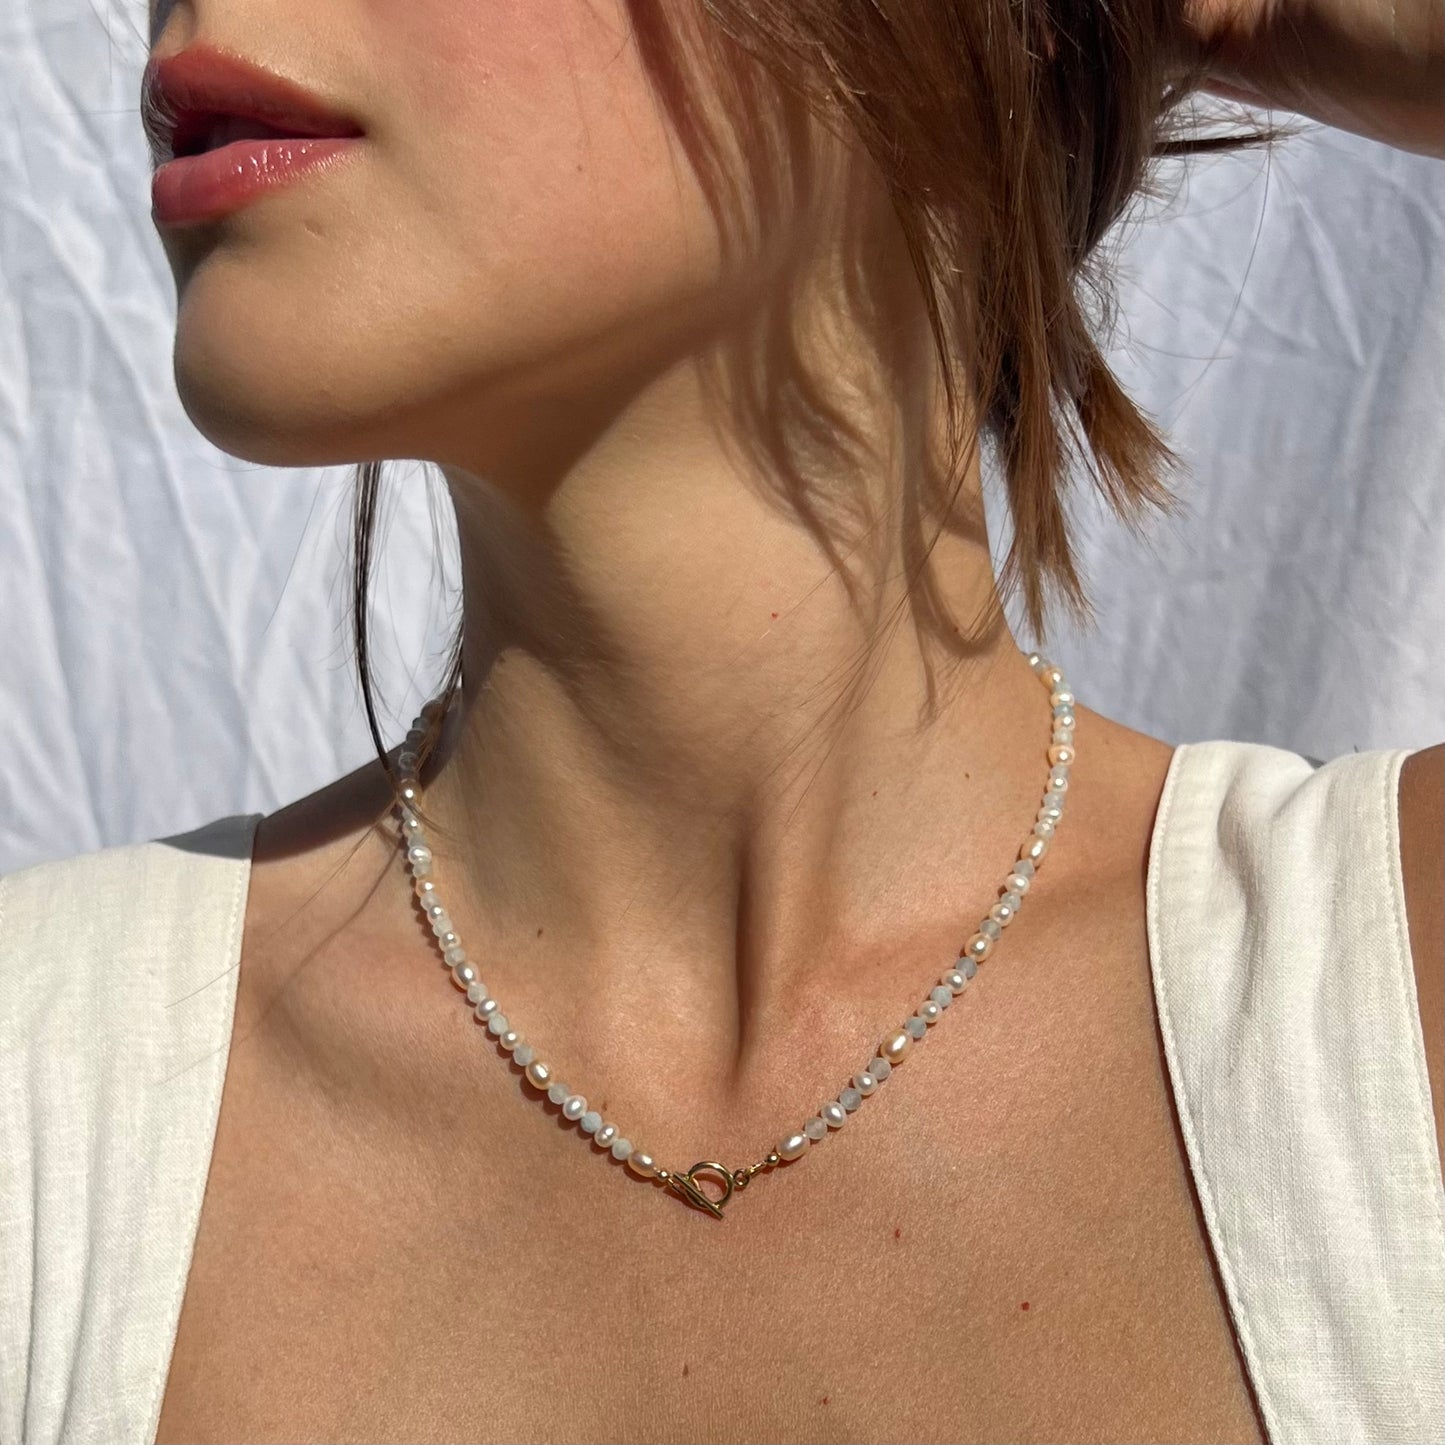 Ocean Sunset Pearl Necklace